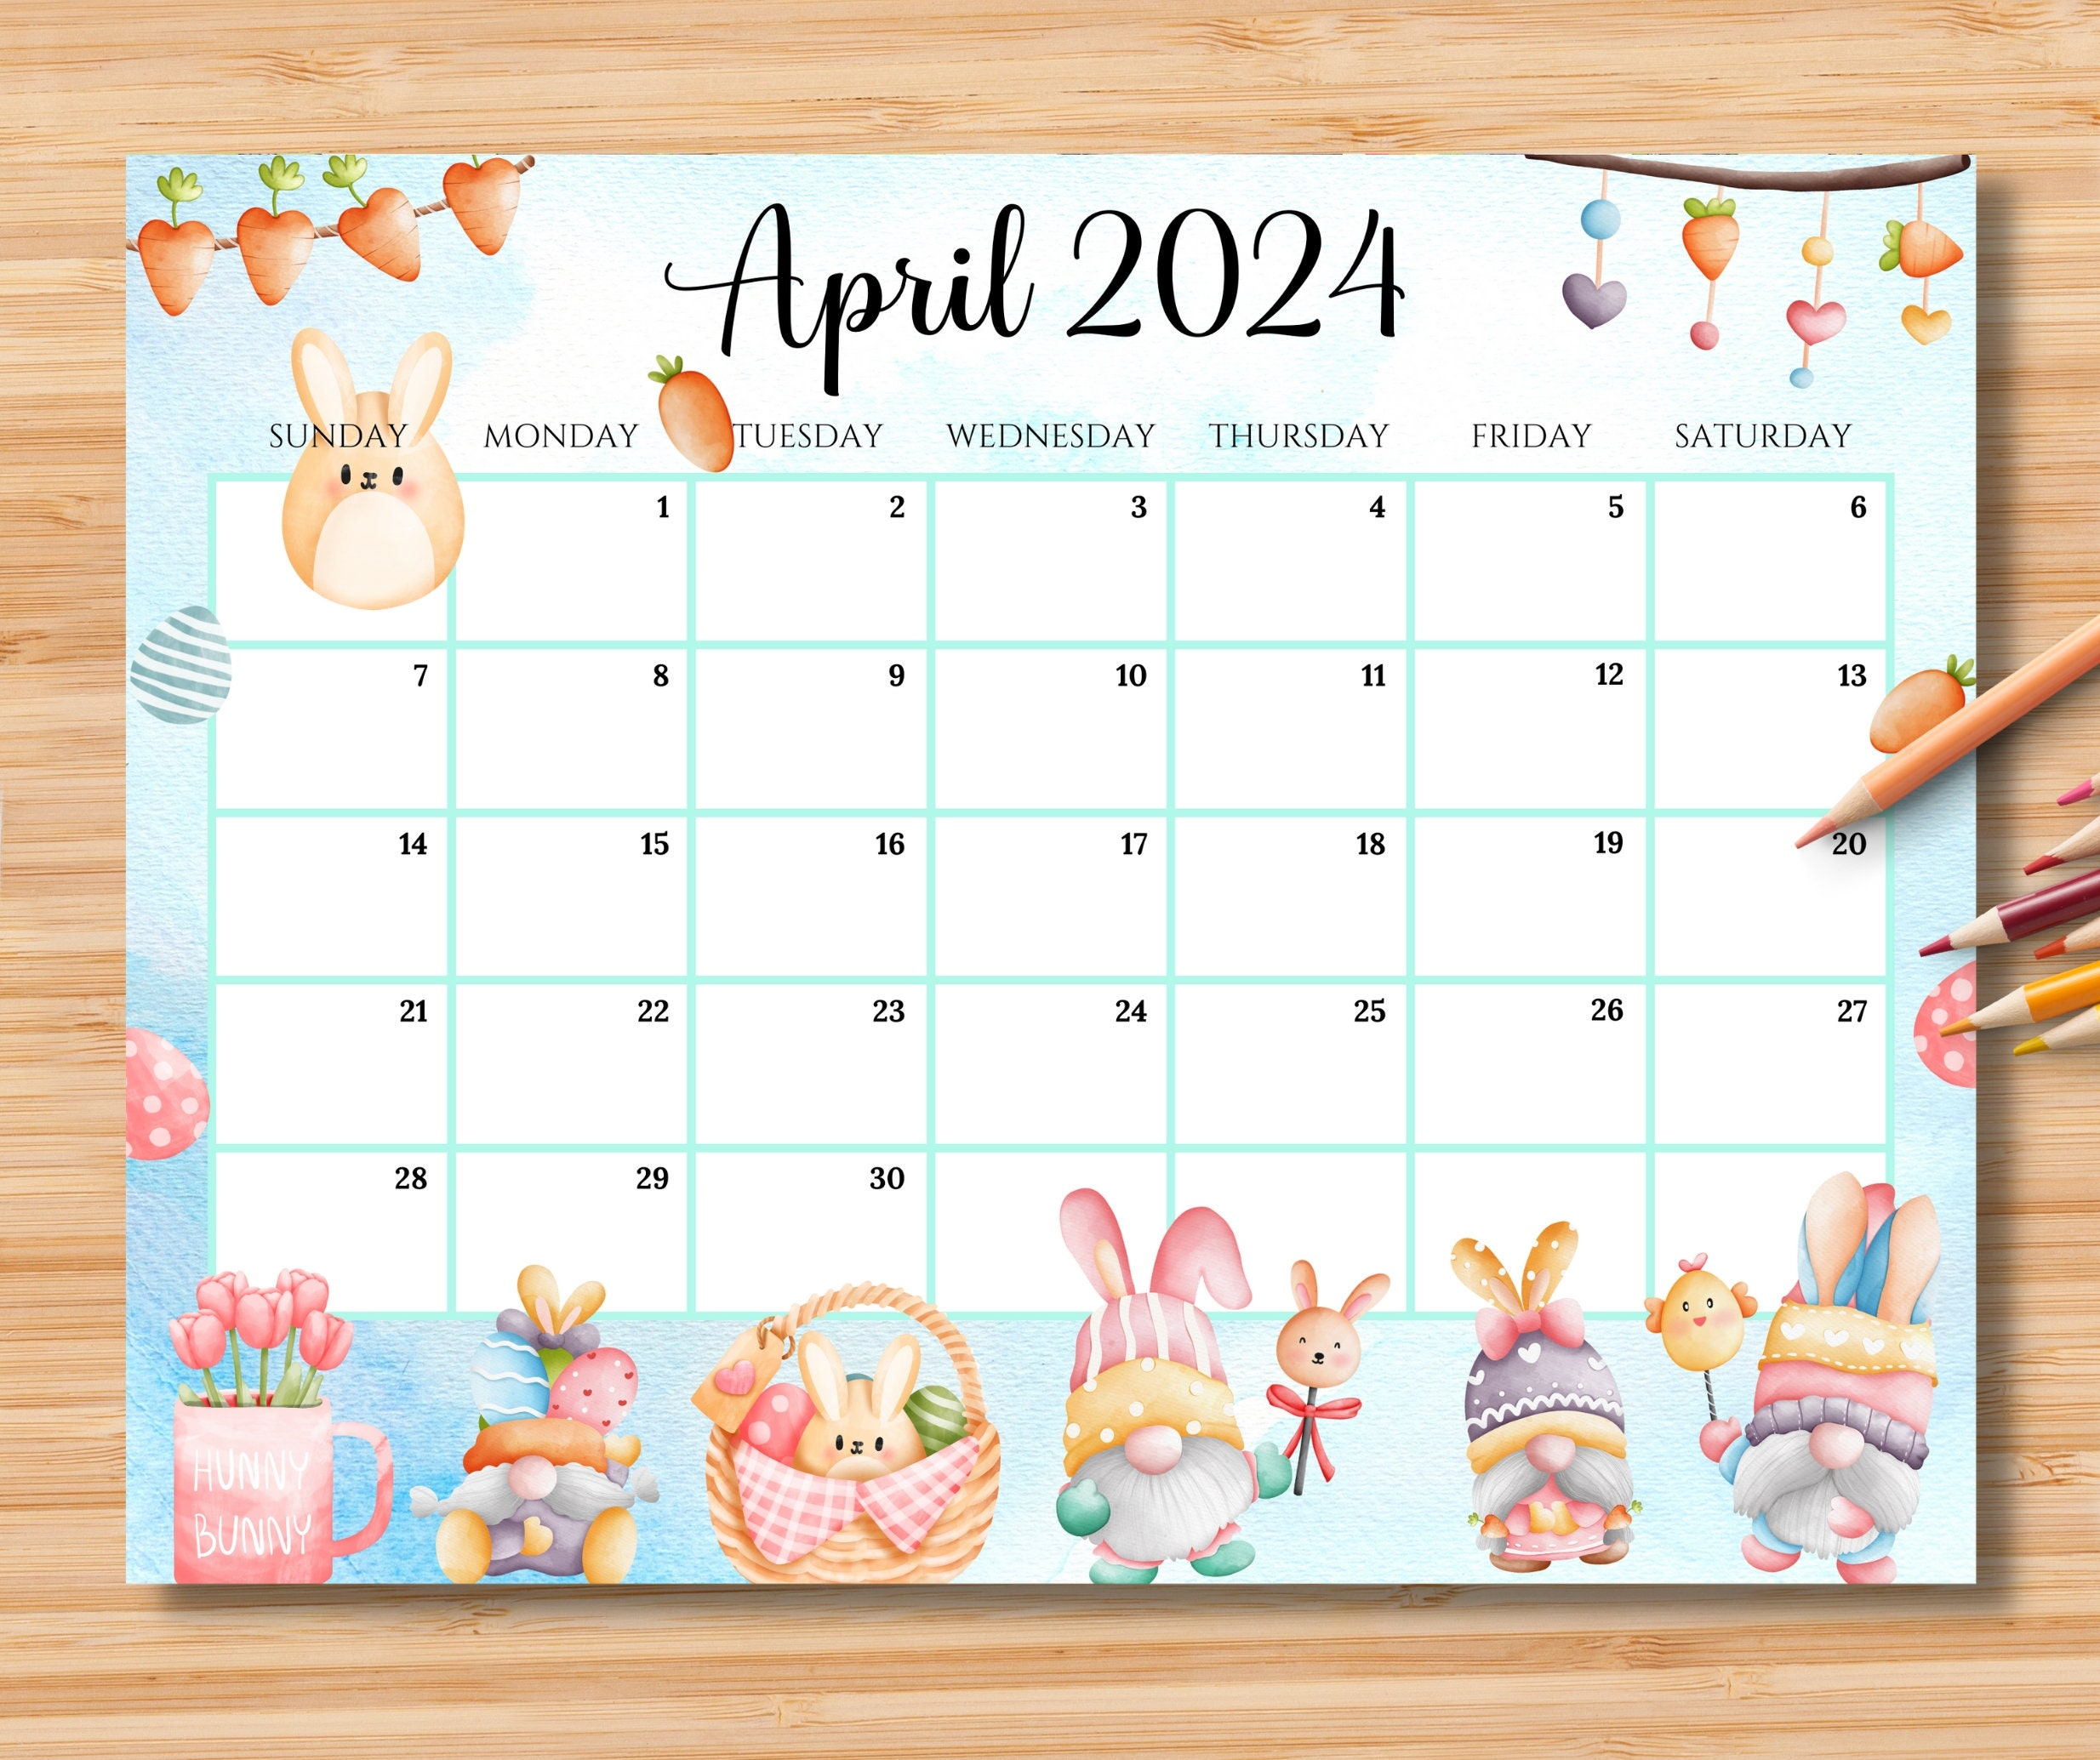 Editable April 2024 Calendar, Happy Easter Day With Cute Gnomes in Editable Calendar April 2024